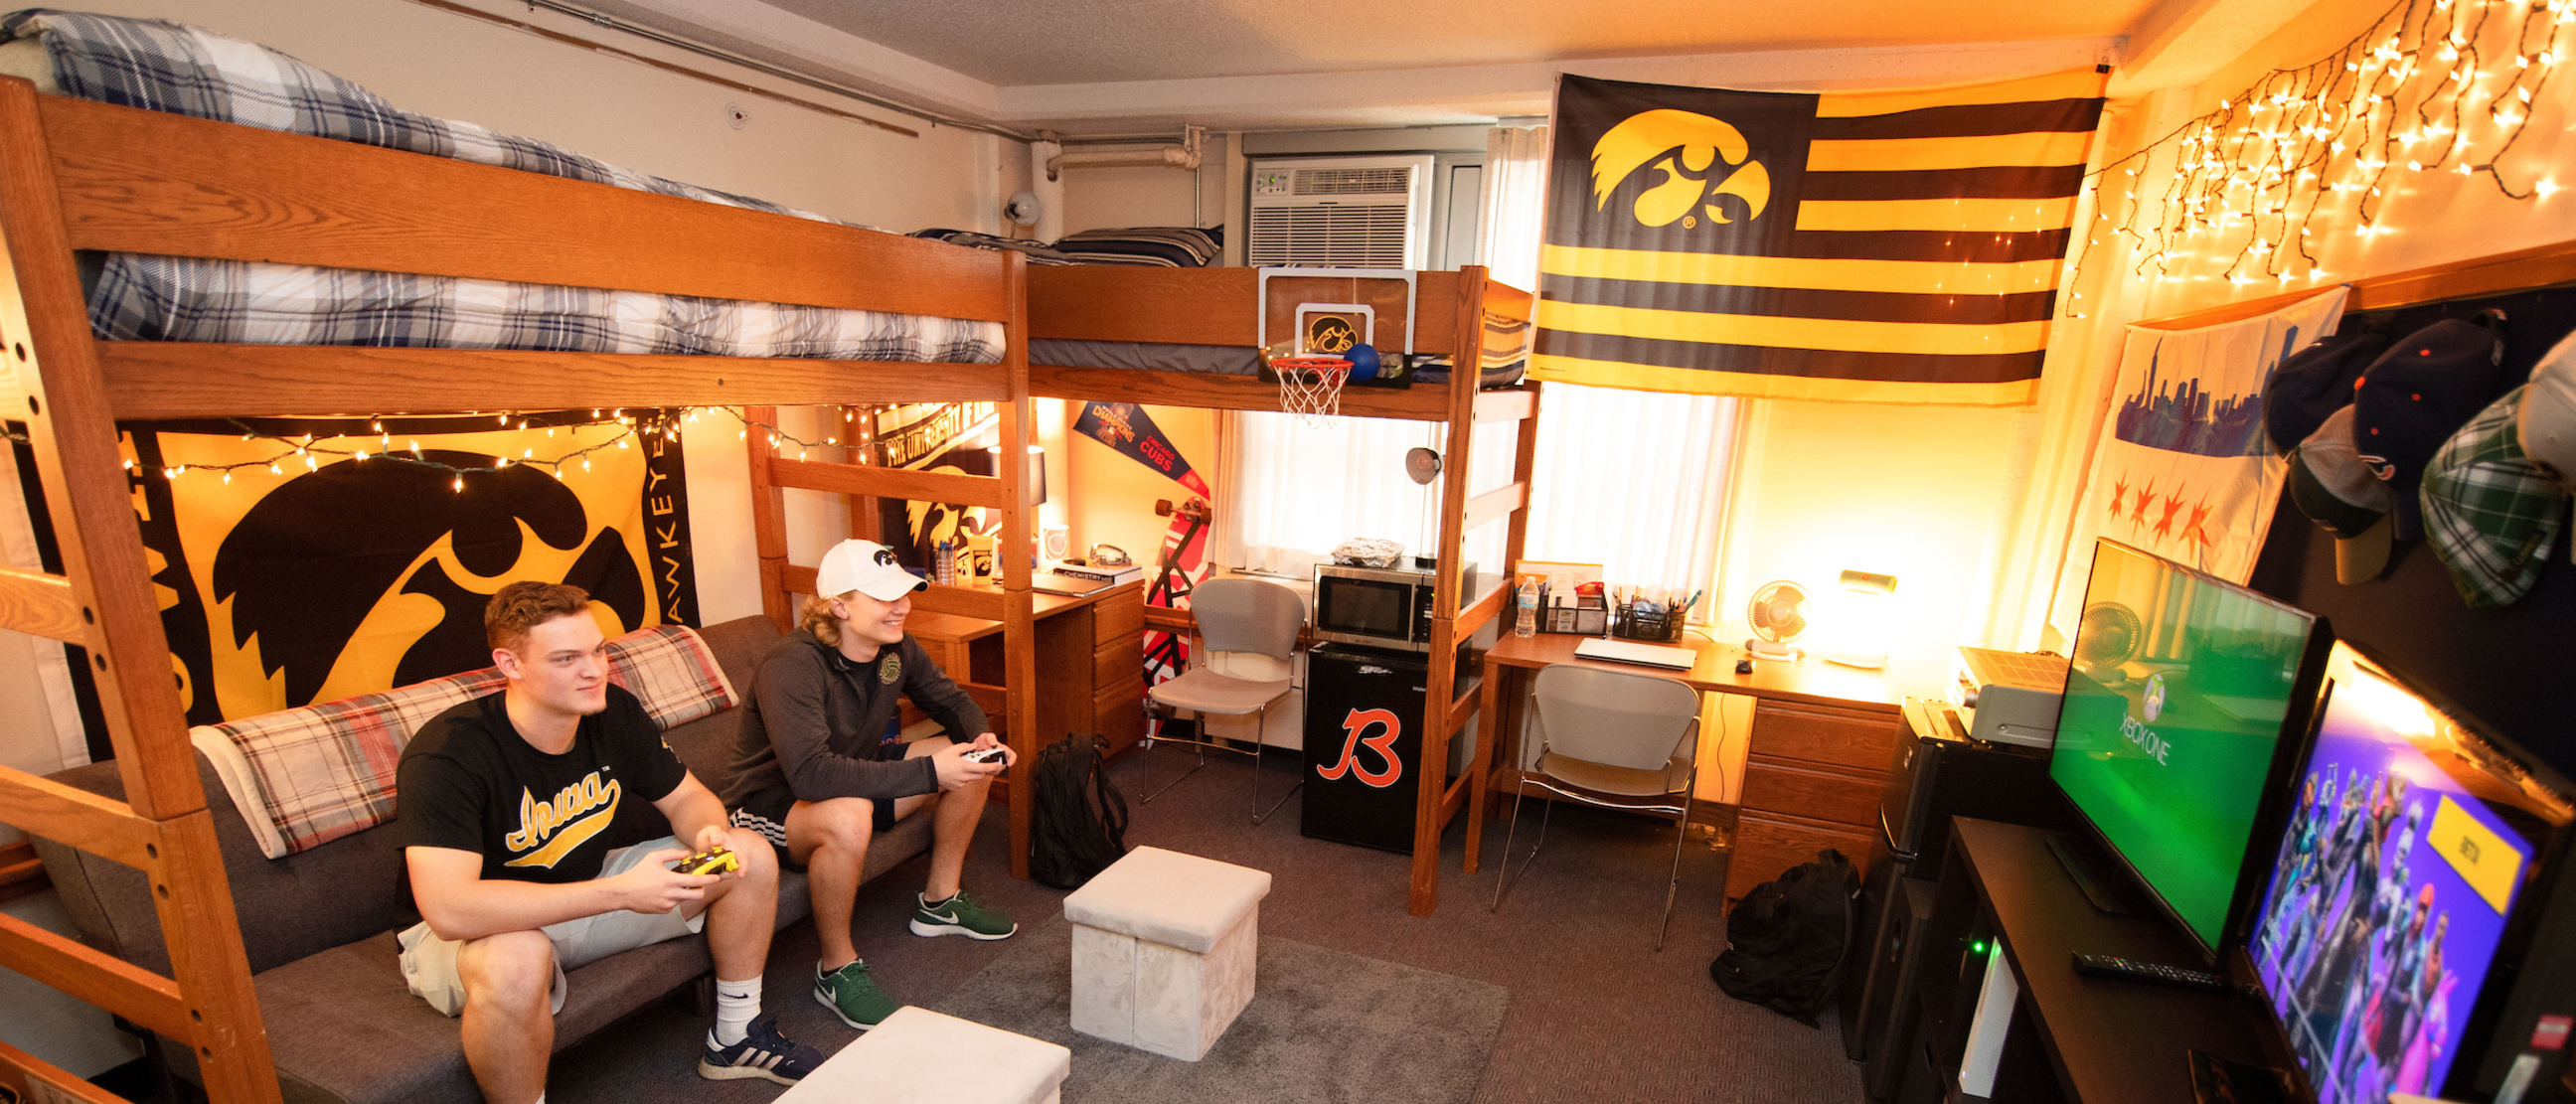 Student Life and Housing Admissions The University of Iowa